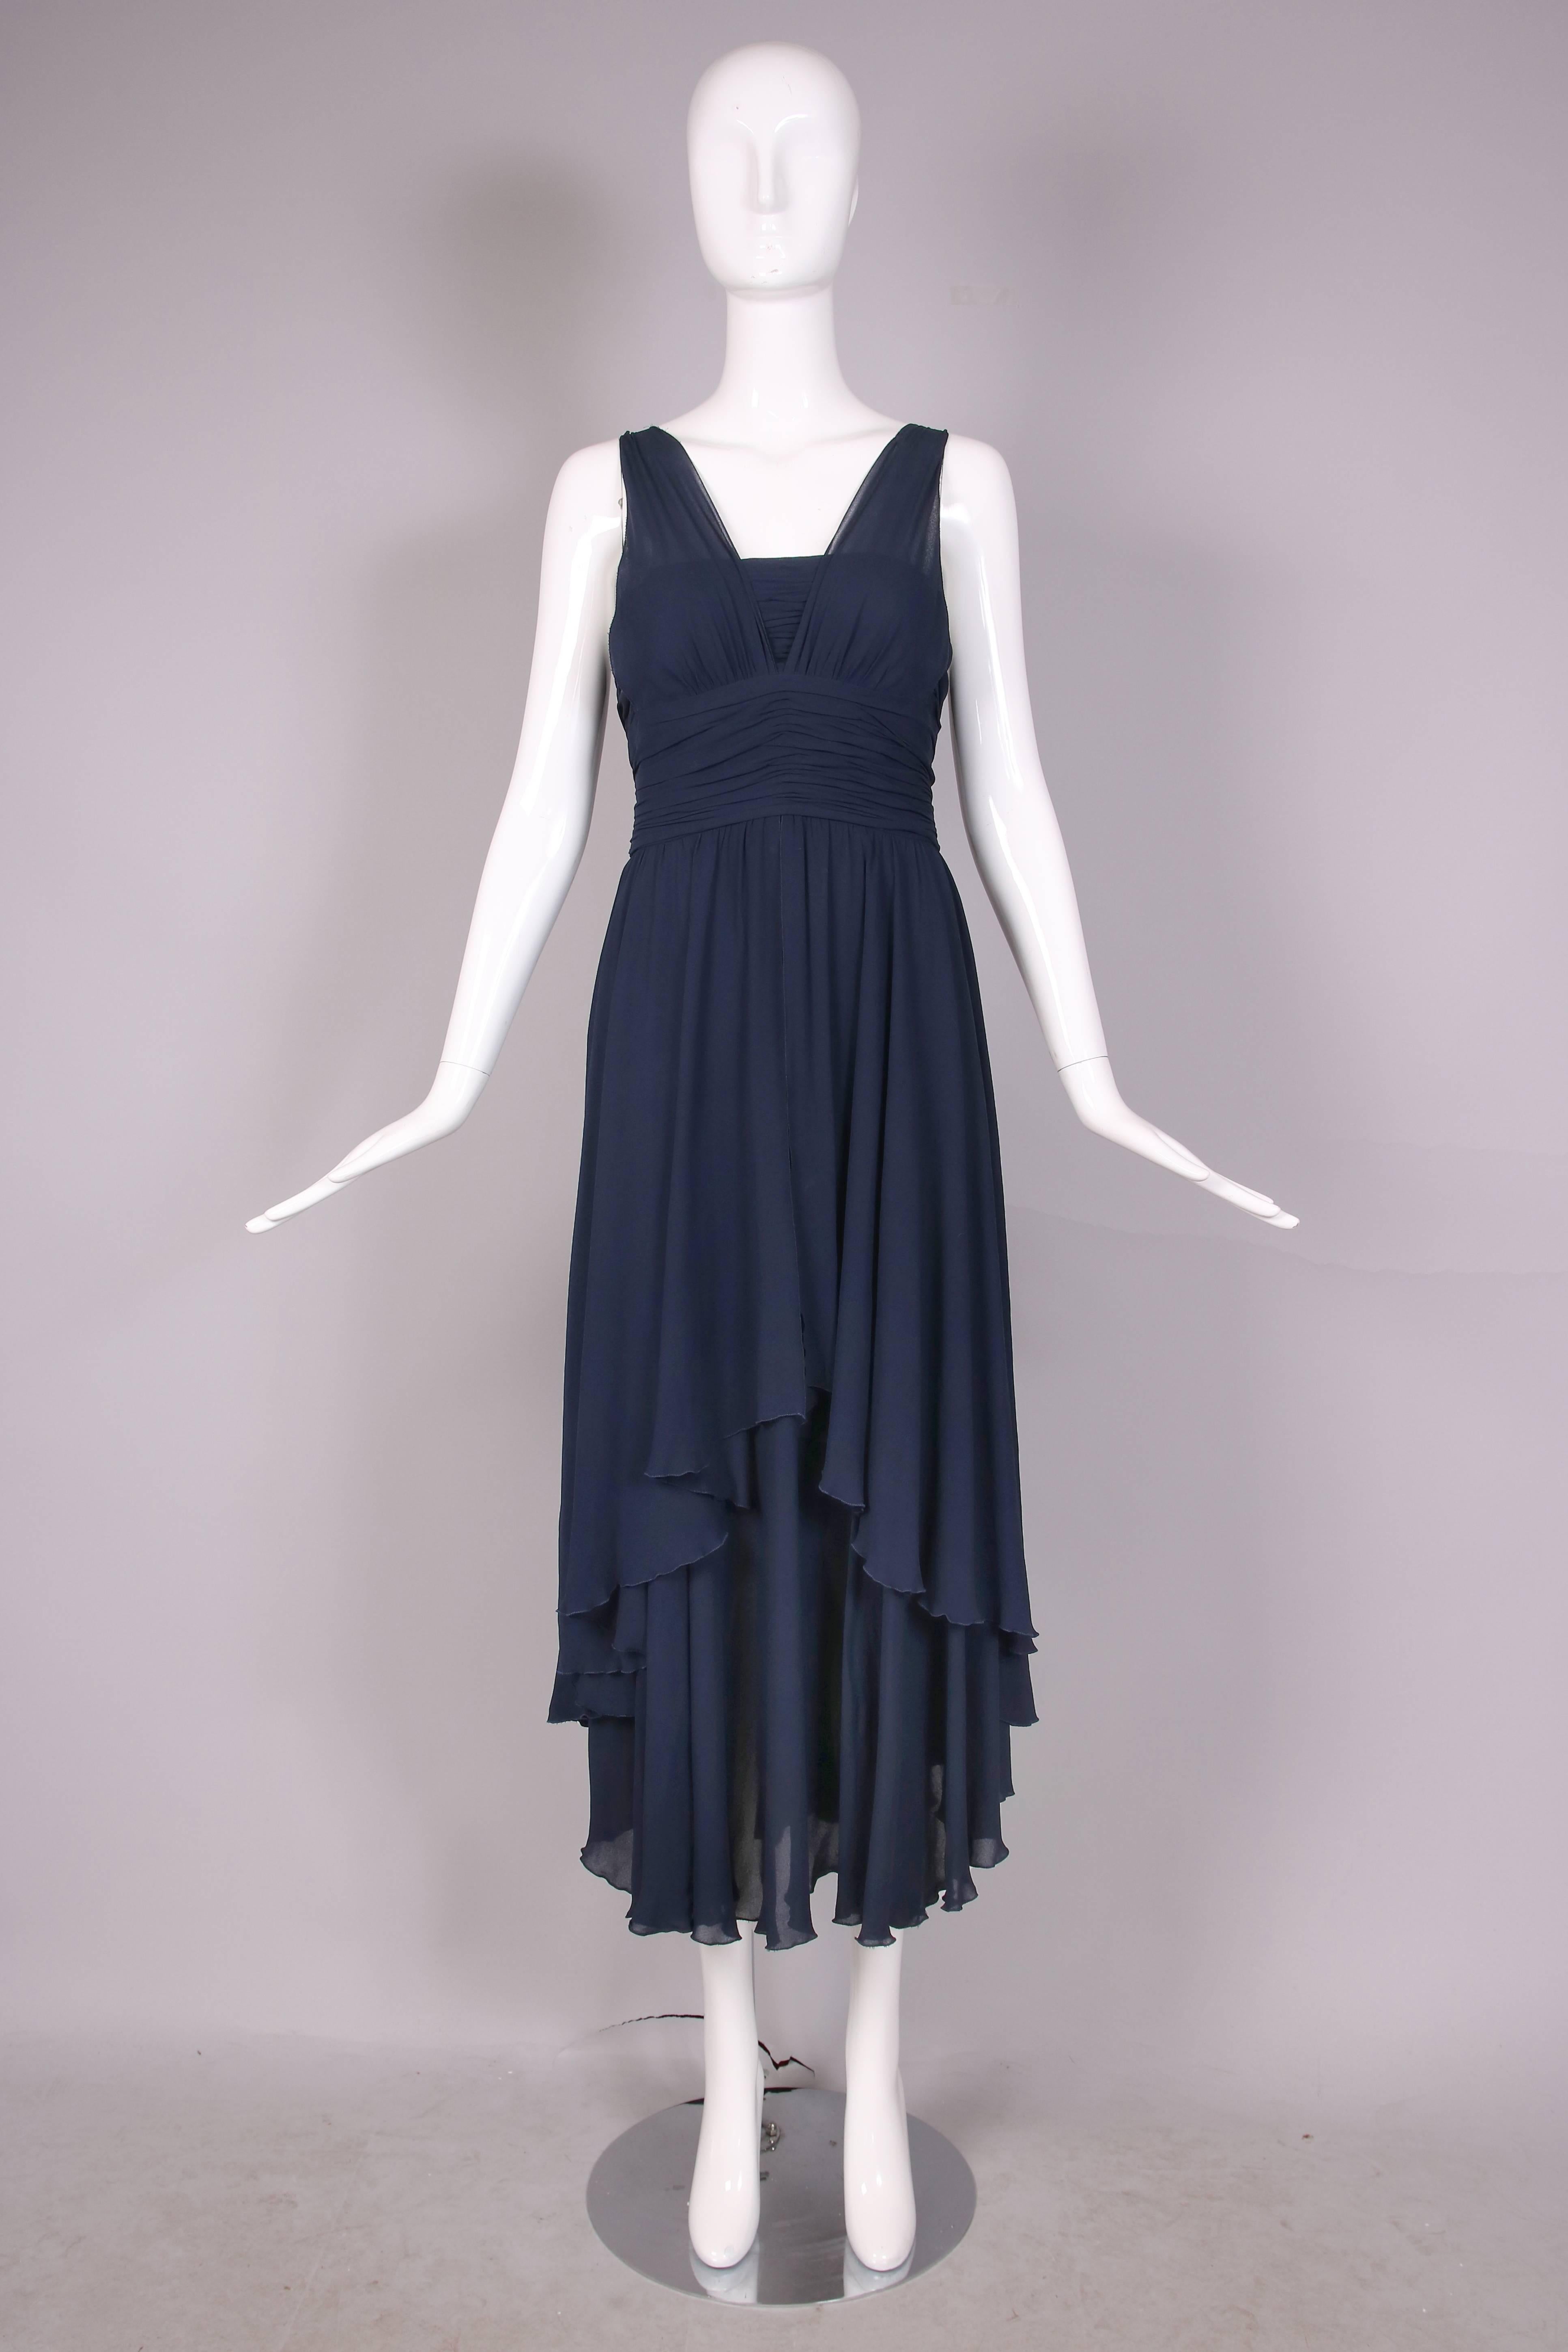 Vintage Chanel navy sheer crepe multi-layered evening dress with twin waterfall hem design at front and back and back bodice straps made out of iconic Chanel leather & chain. There is a zipper closure at bodice back which   features decorative CC